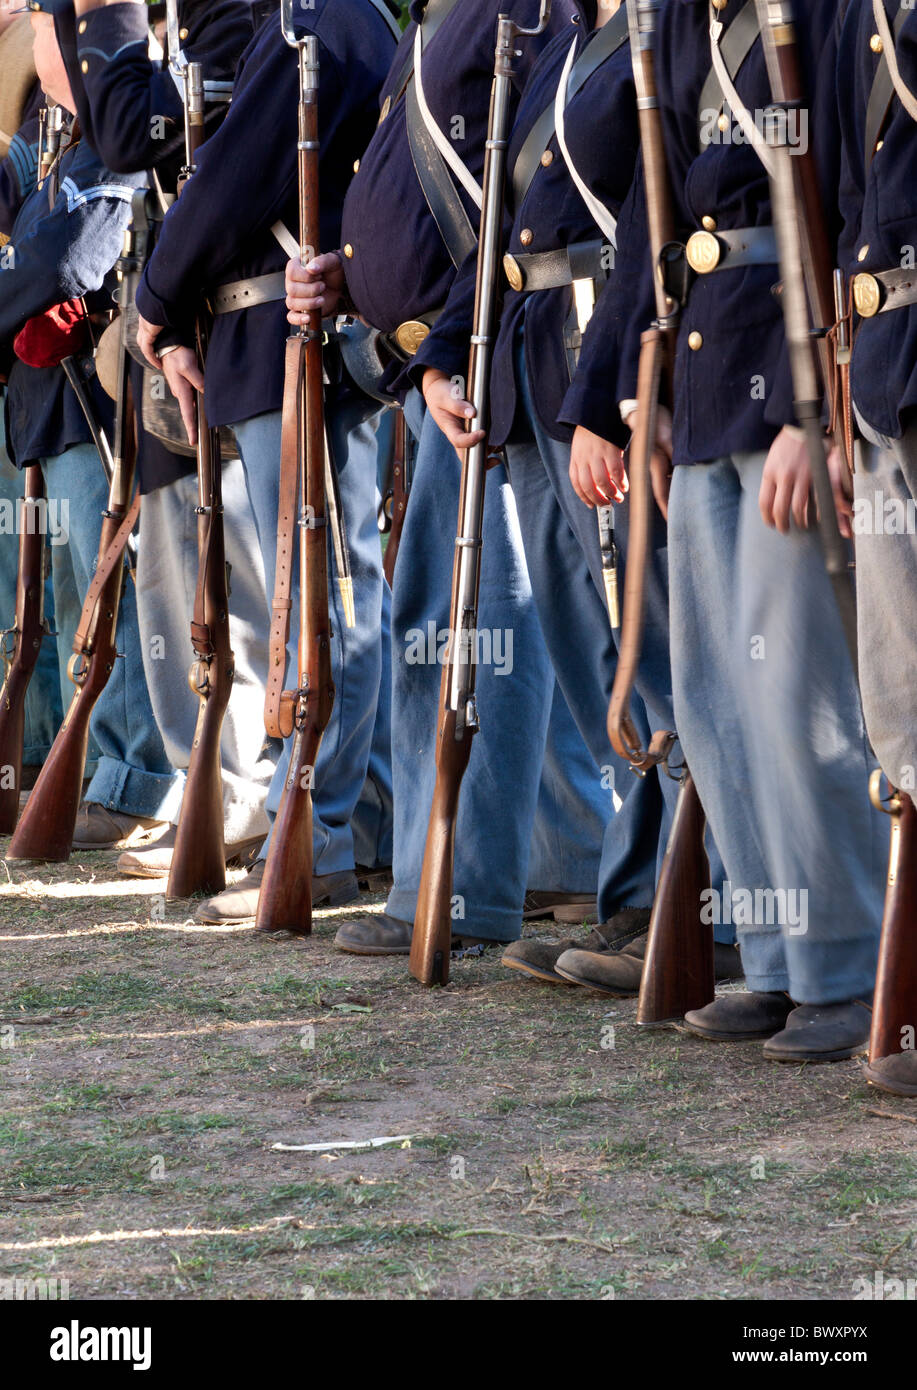 Union soldiers standing at attention during Blue and Gray Civil War Reenactment Stock Photo